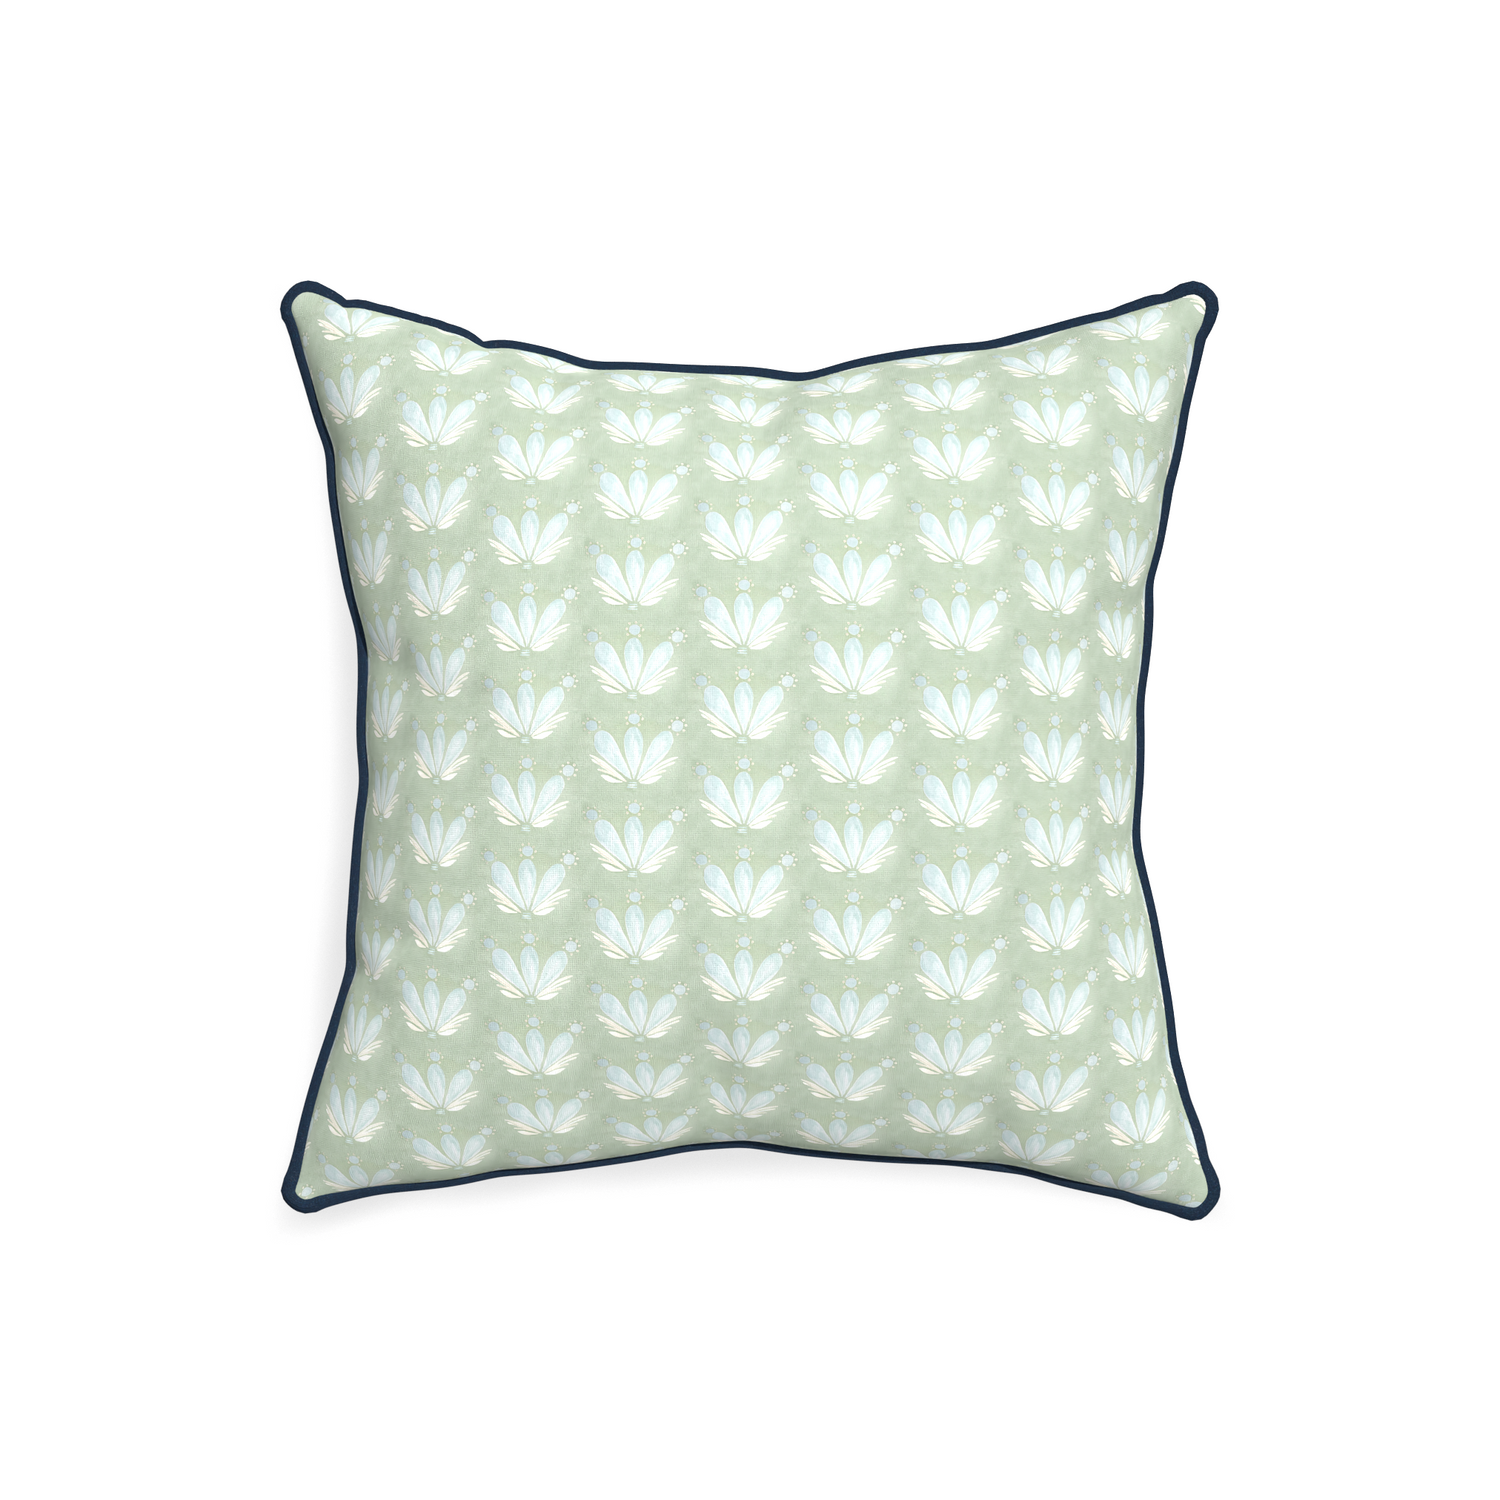 20-square serena sea salt custom blue & green floral drop repeatpillow with c piping on white background